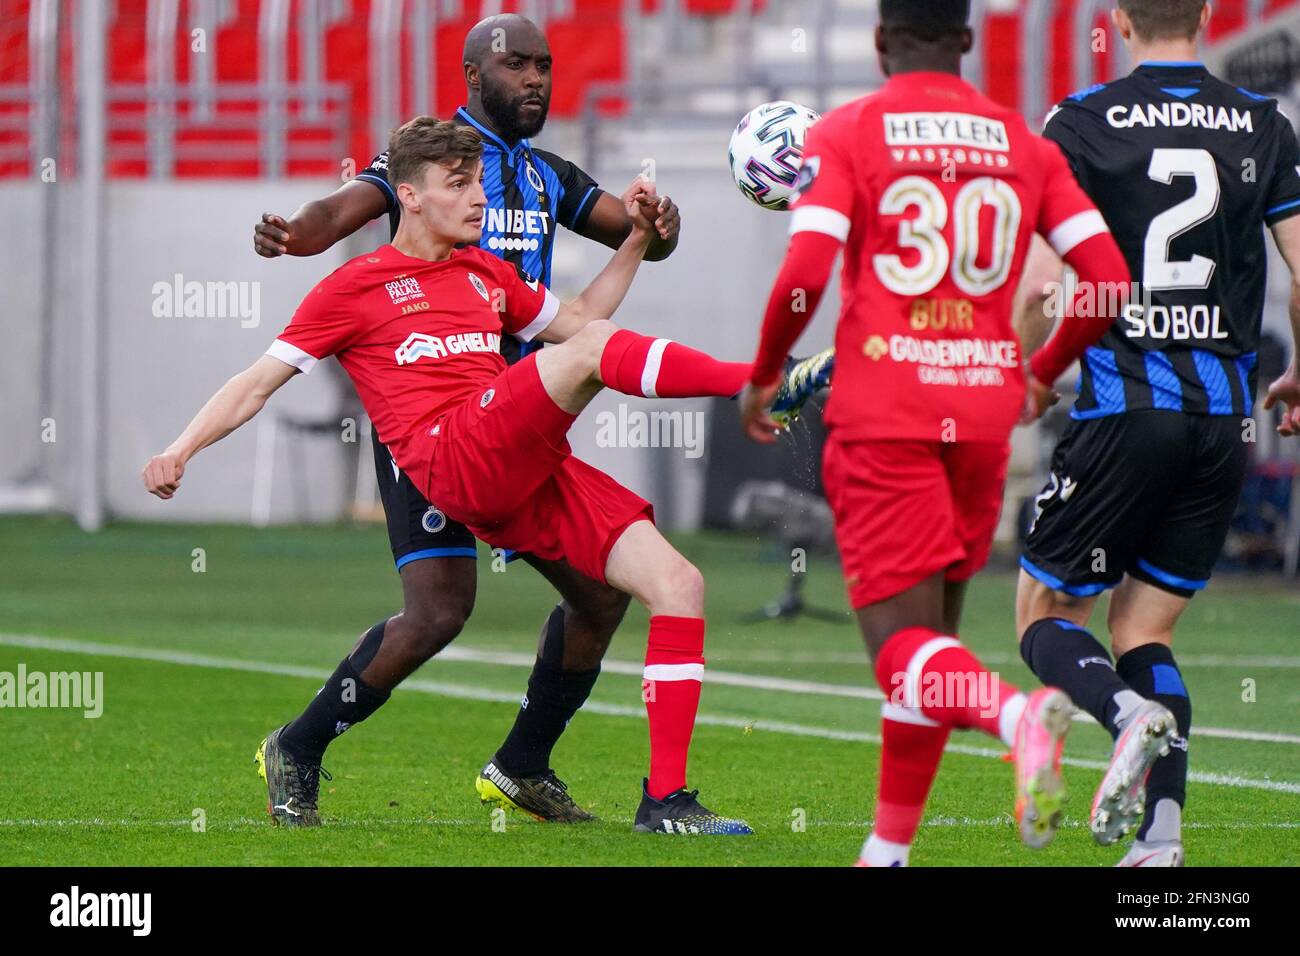 ANTWERP, BELGIUM - MAY 13: Eder Balanta of Club Brugge battles for posession with Pieter Gerkens of Royal Antwerp during the Jupiler Pro League match Stock Photo